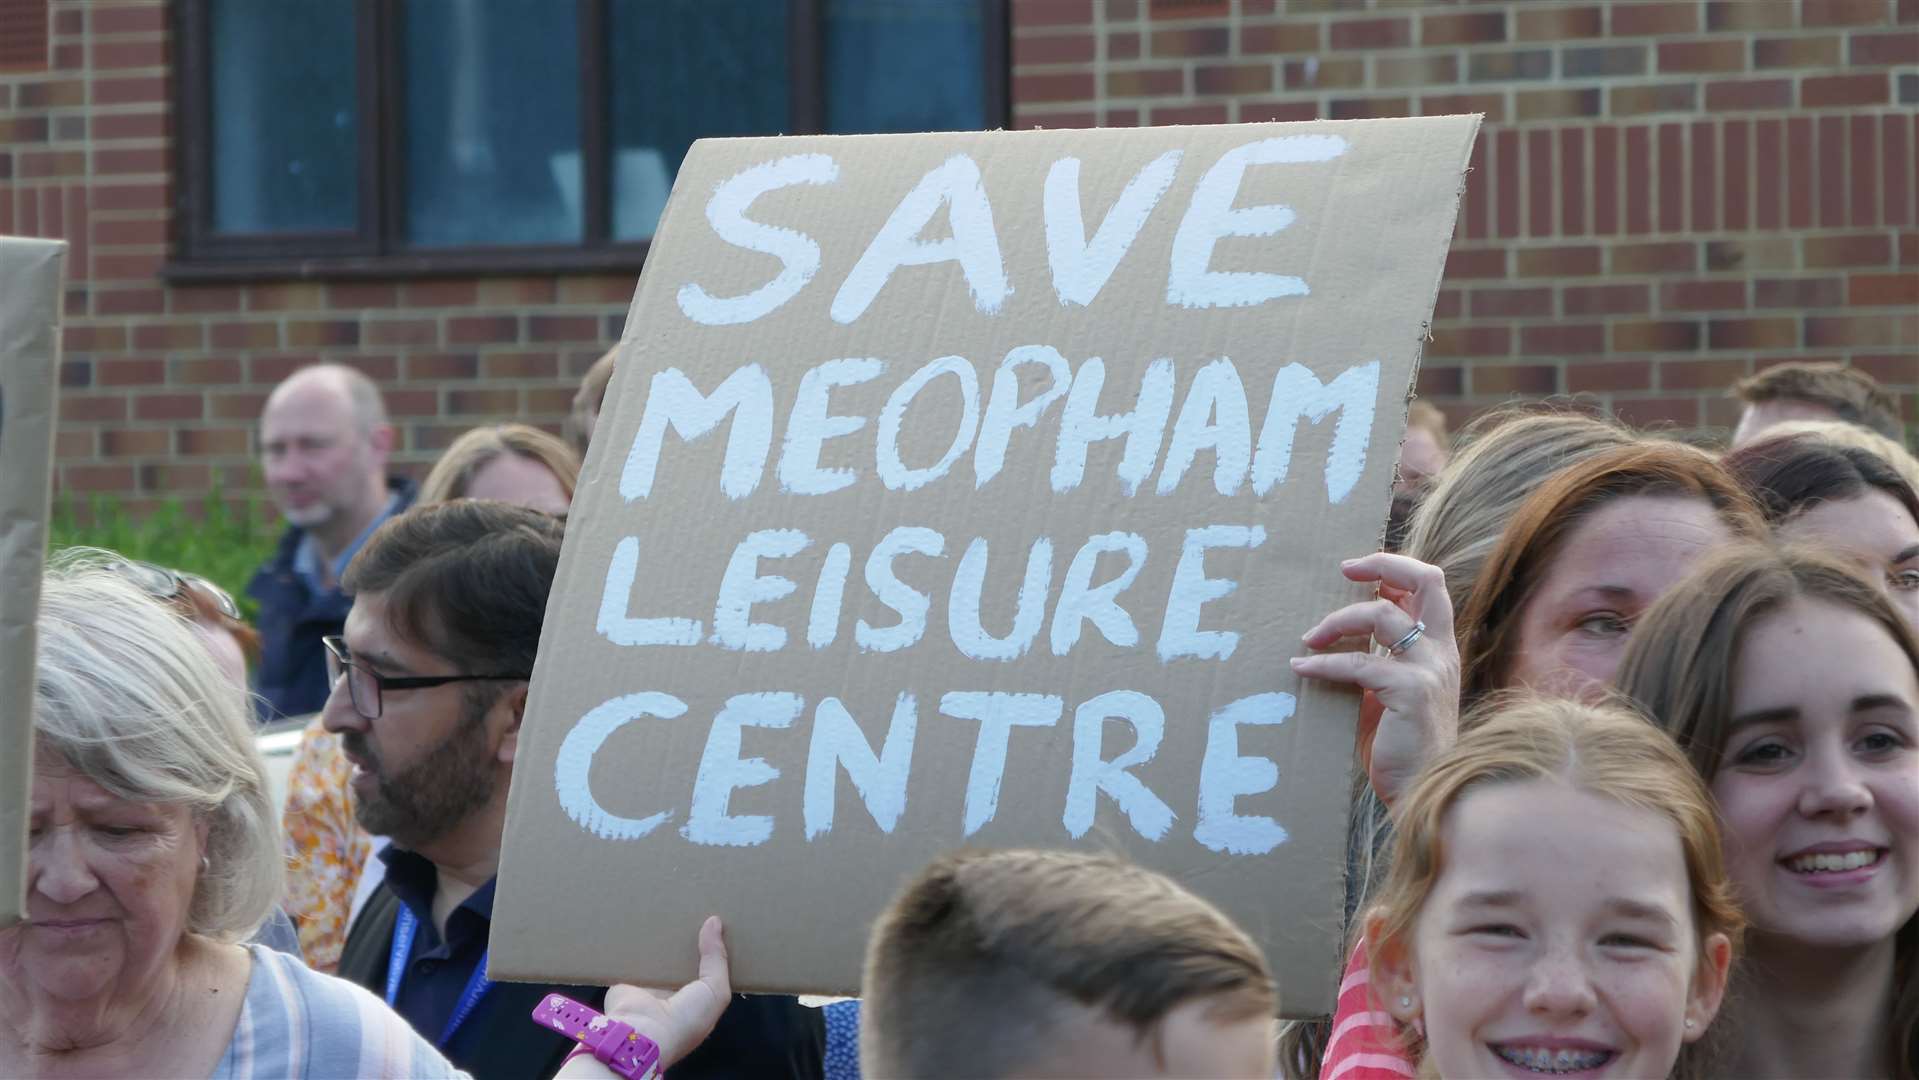 Campaigners were trying to raise £30k to save the centre. Photo: Anna Roberts